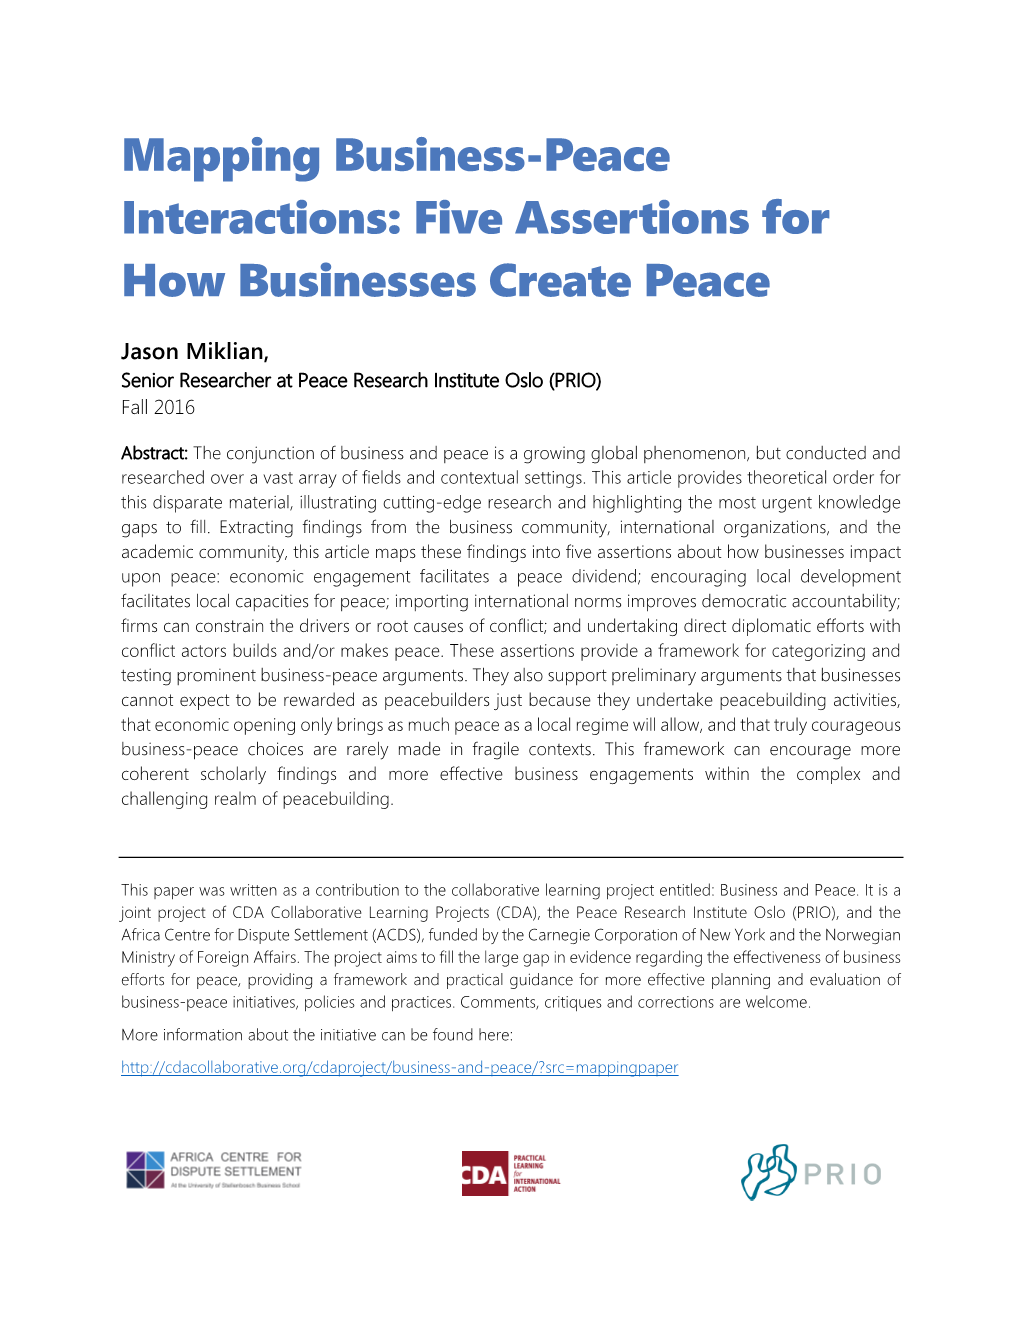 Mapping Business-Peace Interactions: Five Assertions for How Businesses Create Peace